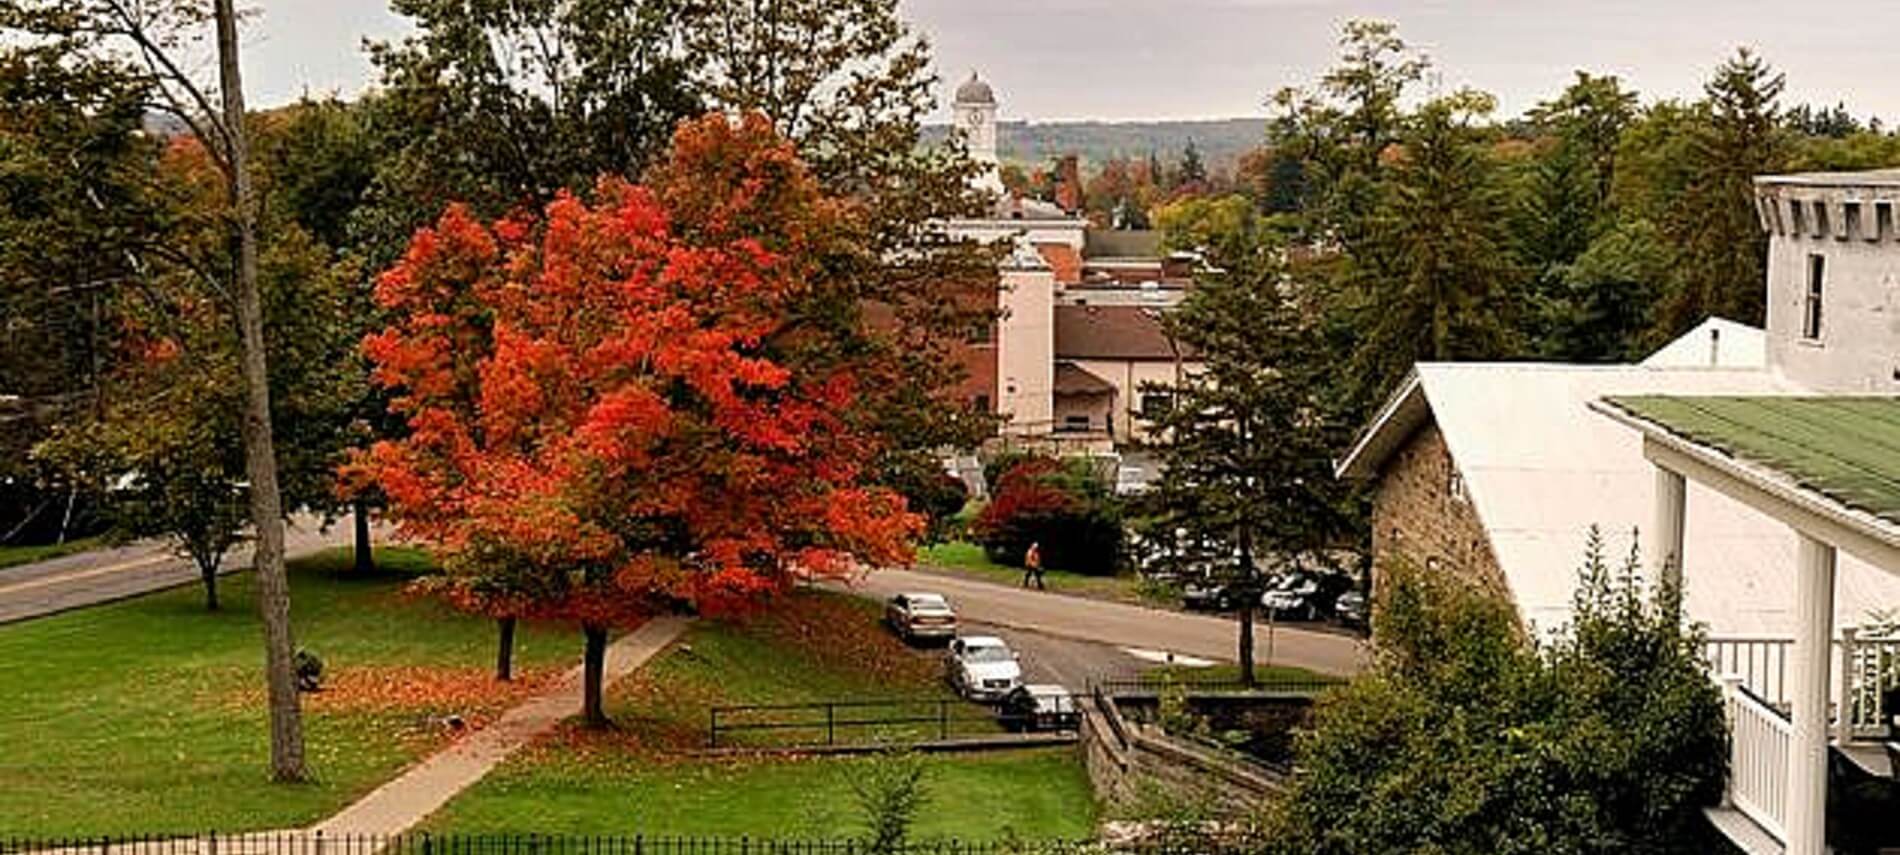 View of trees with fall foliage in a park overlooking a charming town.